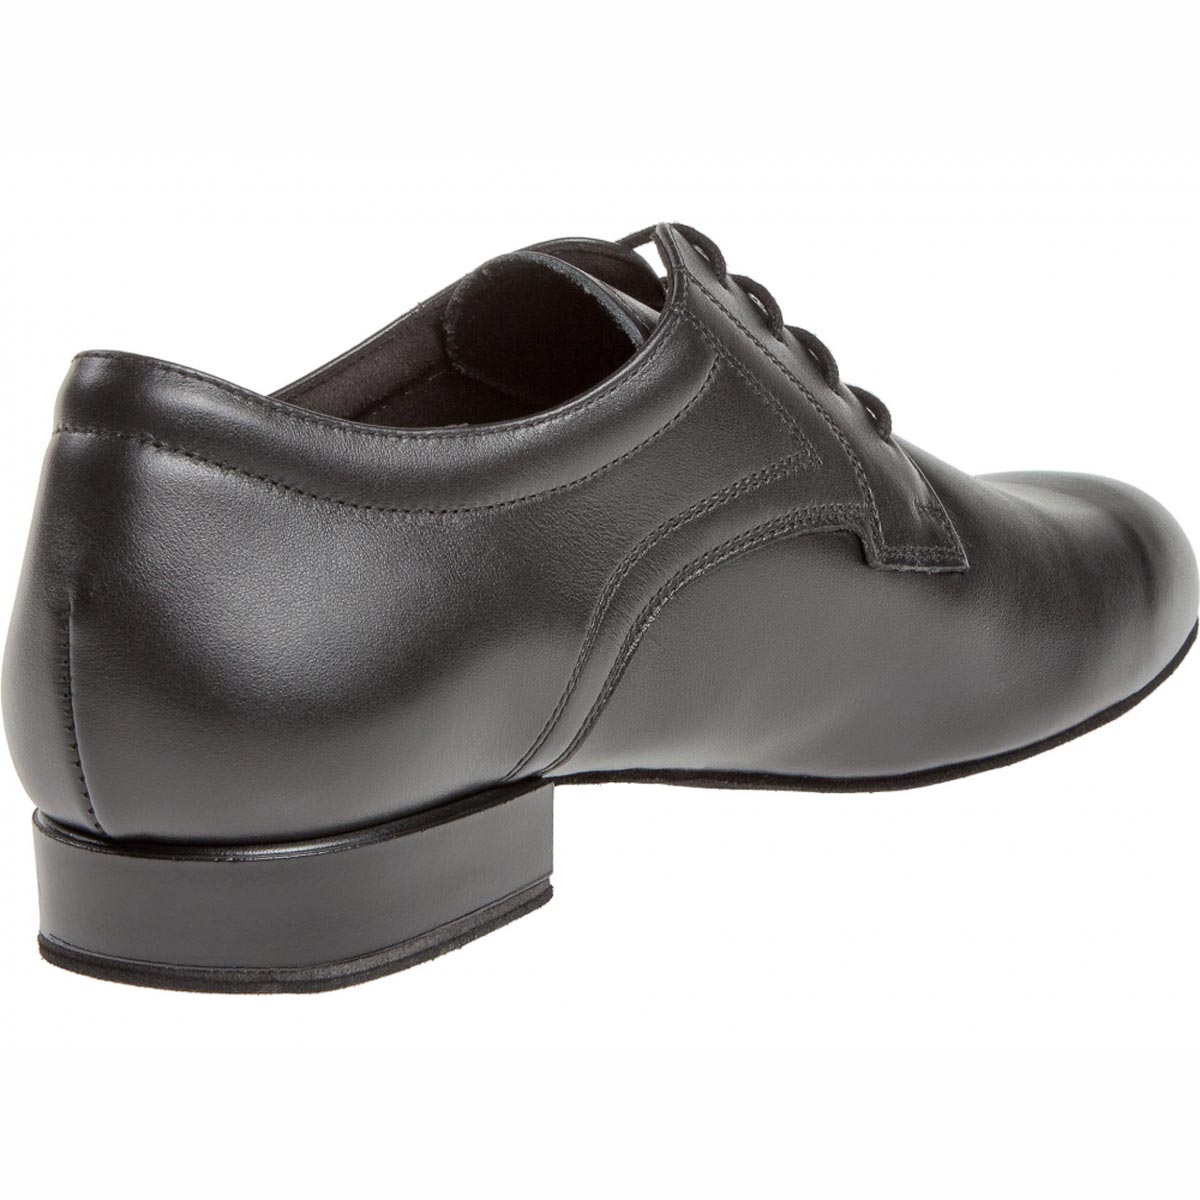 Diamant - Mens Dance Shoes 085-026-028 - Black Leather [Extra Wide]